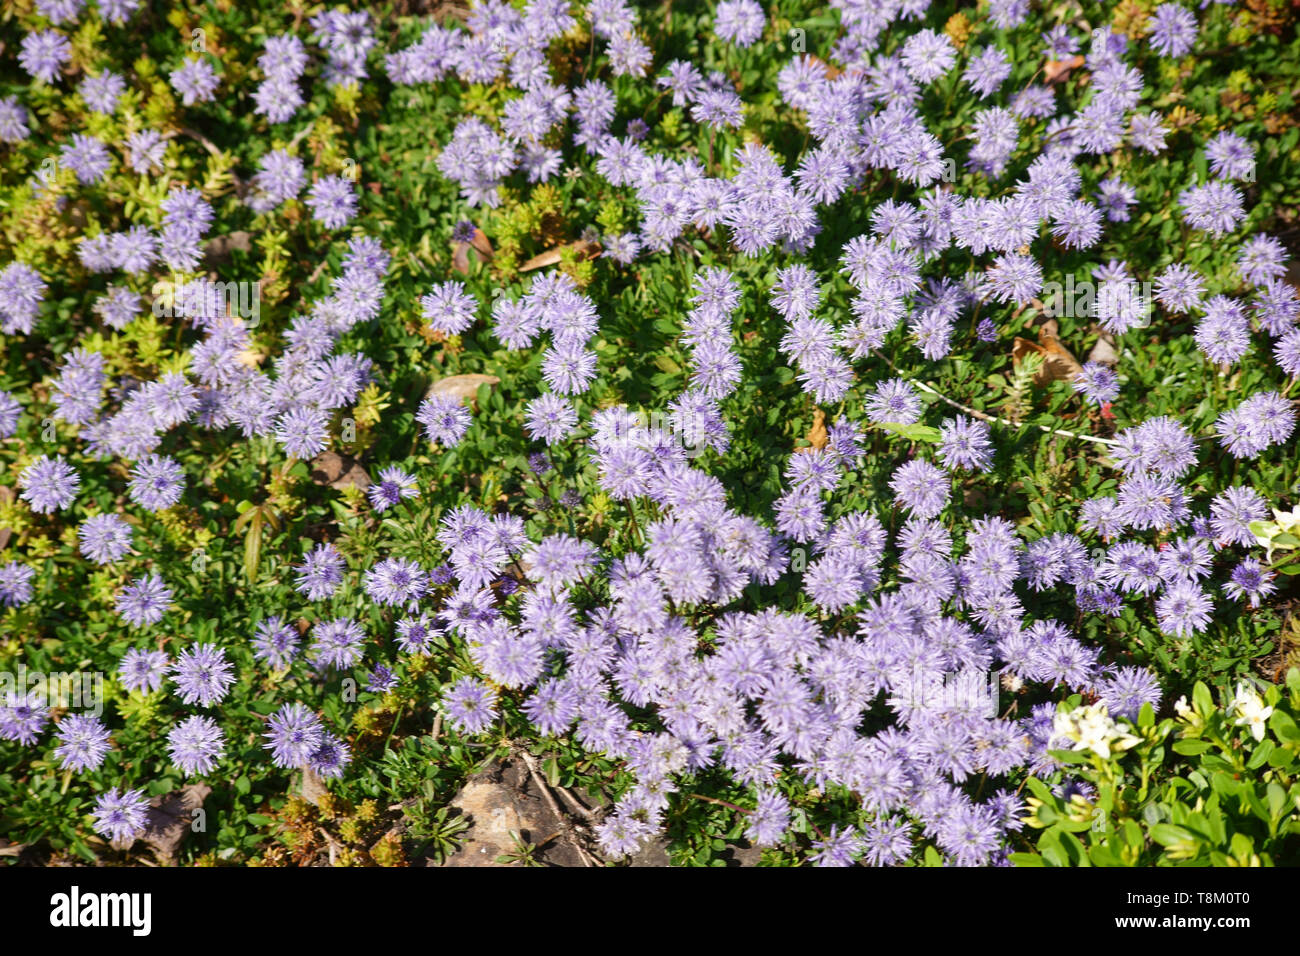 The closeup and top view of a garden bed with the flowers of the heart-leaved globe flower. Stock Photo